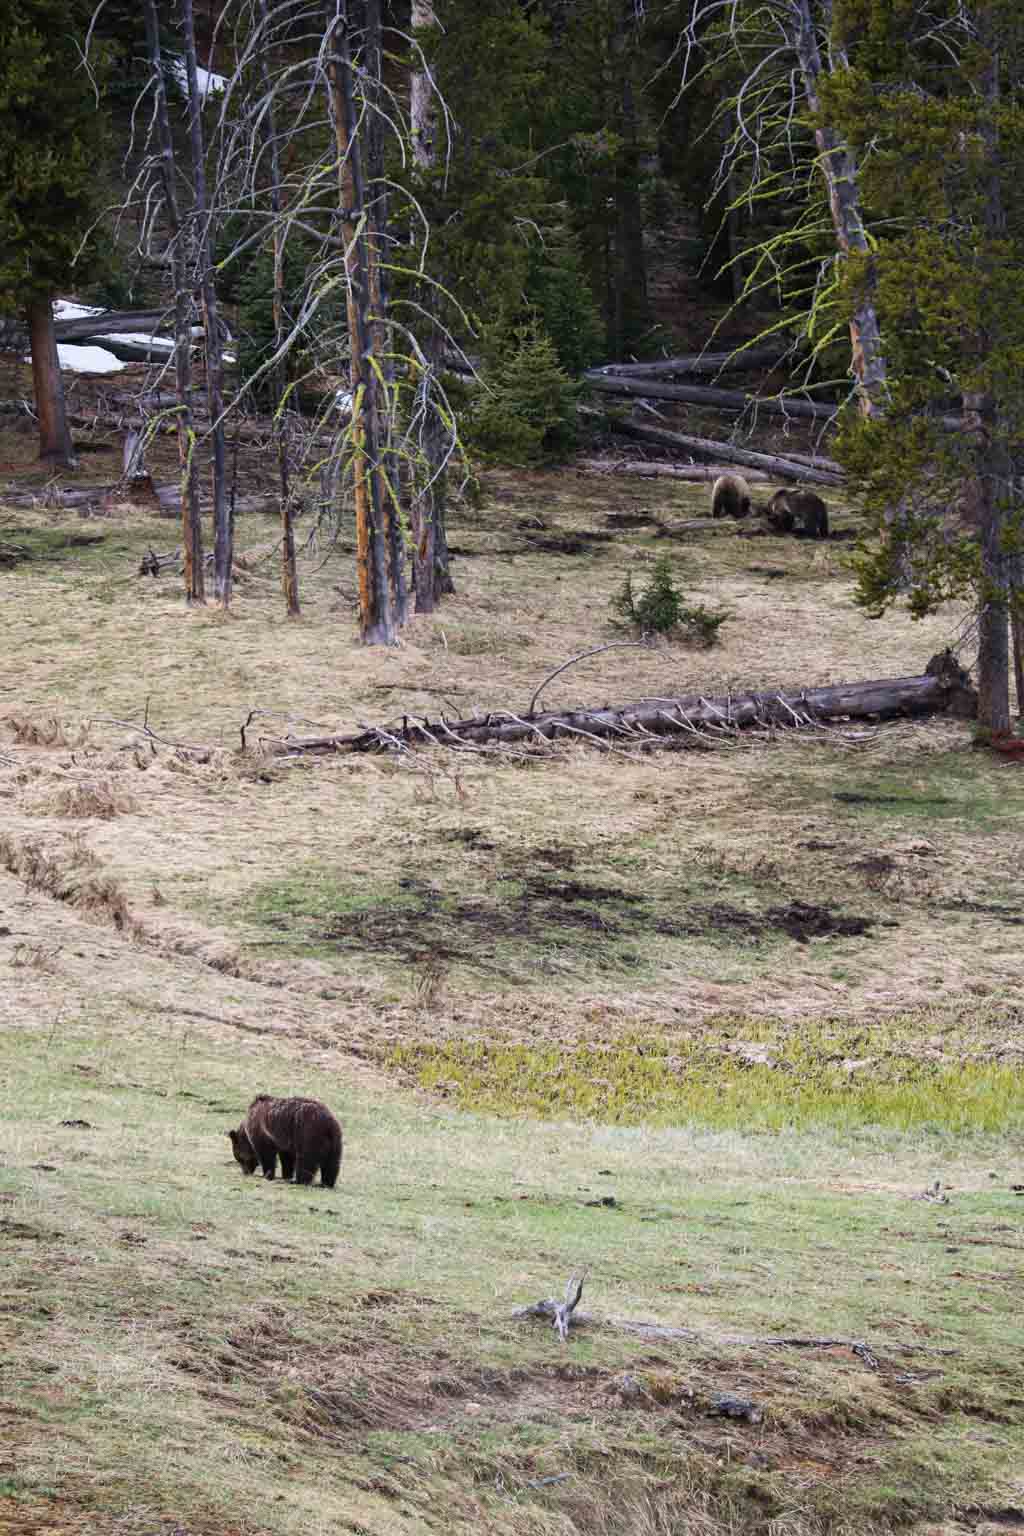 Grizzly bear sow with cubs in Yellowstone National Park